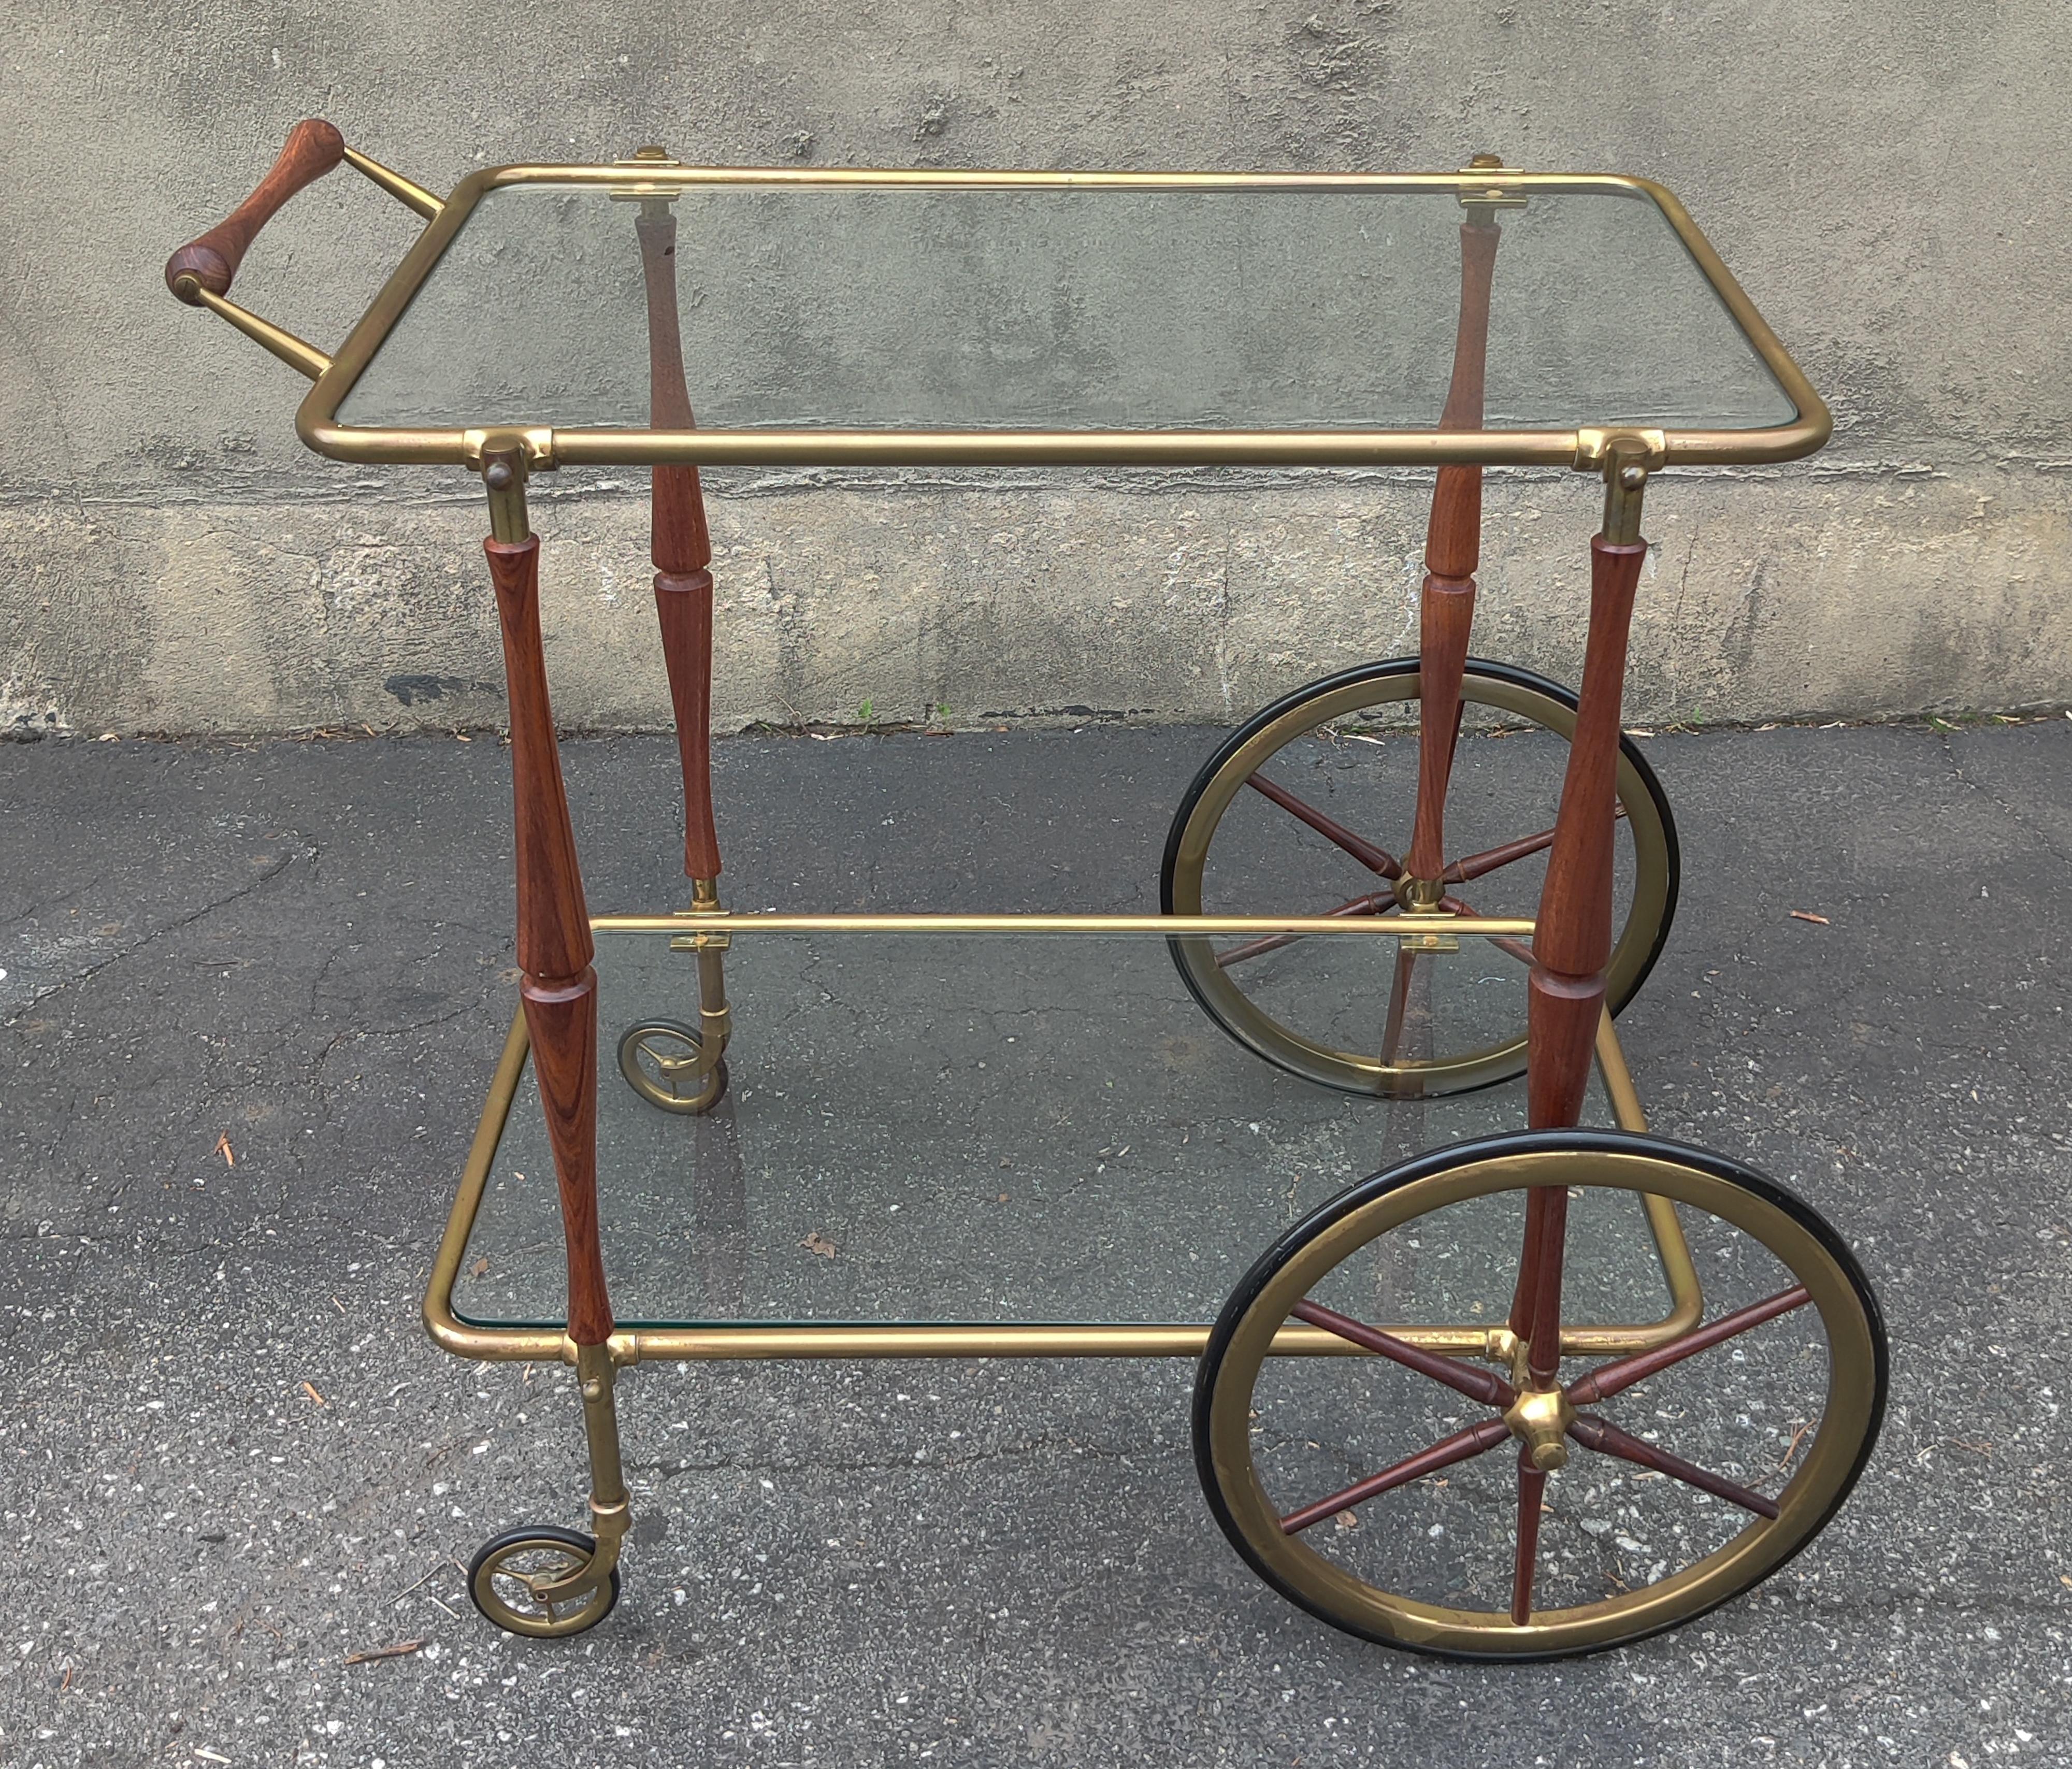 A very elegant and well-made Italian bar cart in the manner of Cesare Lacca or Gio Ponti. What makes this cart so special is the quality of construction. Solid and tubular brass paired with turned walnut and quality rubber wheels. This vintage and